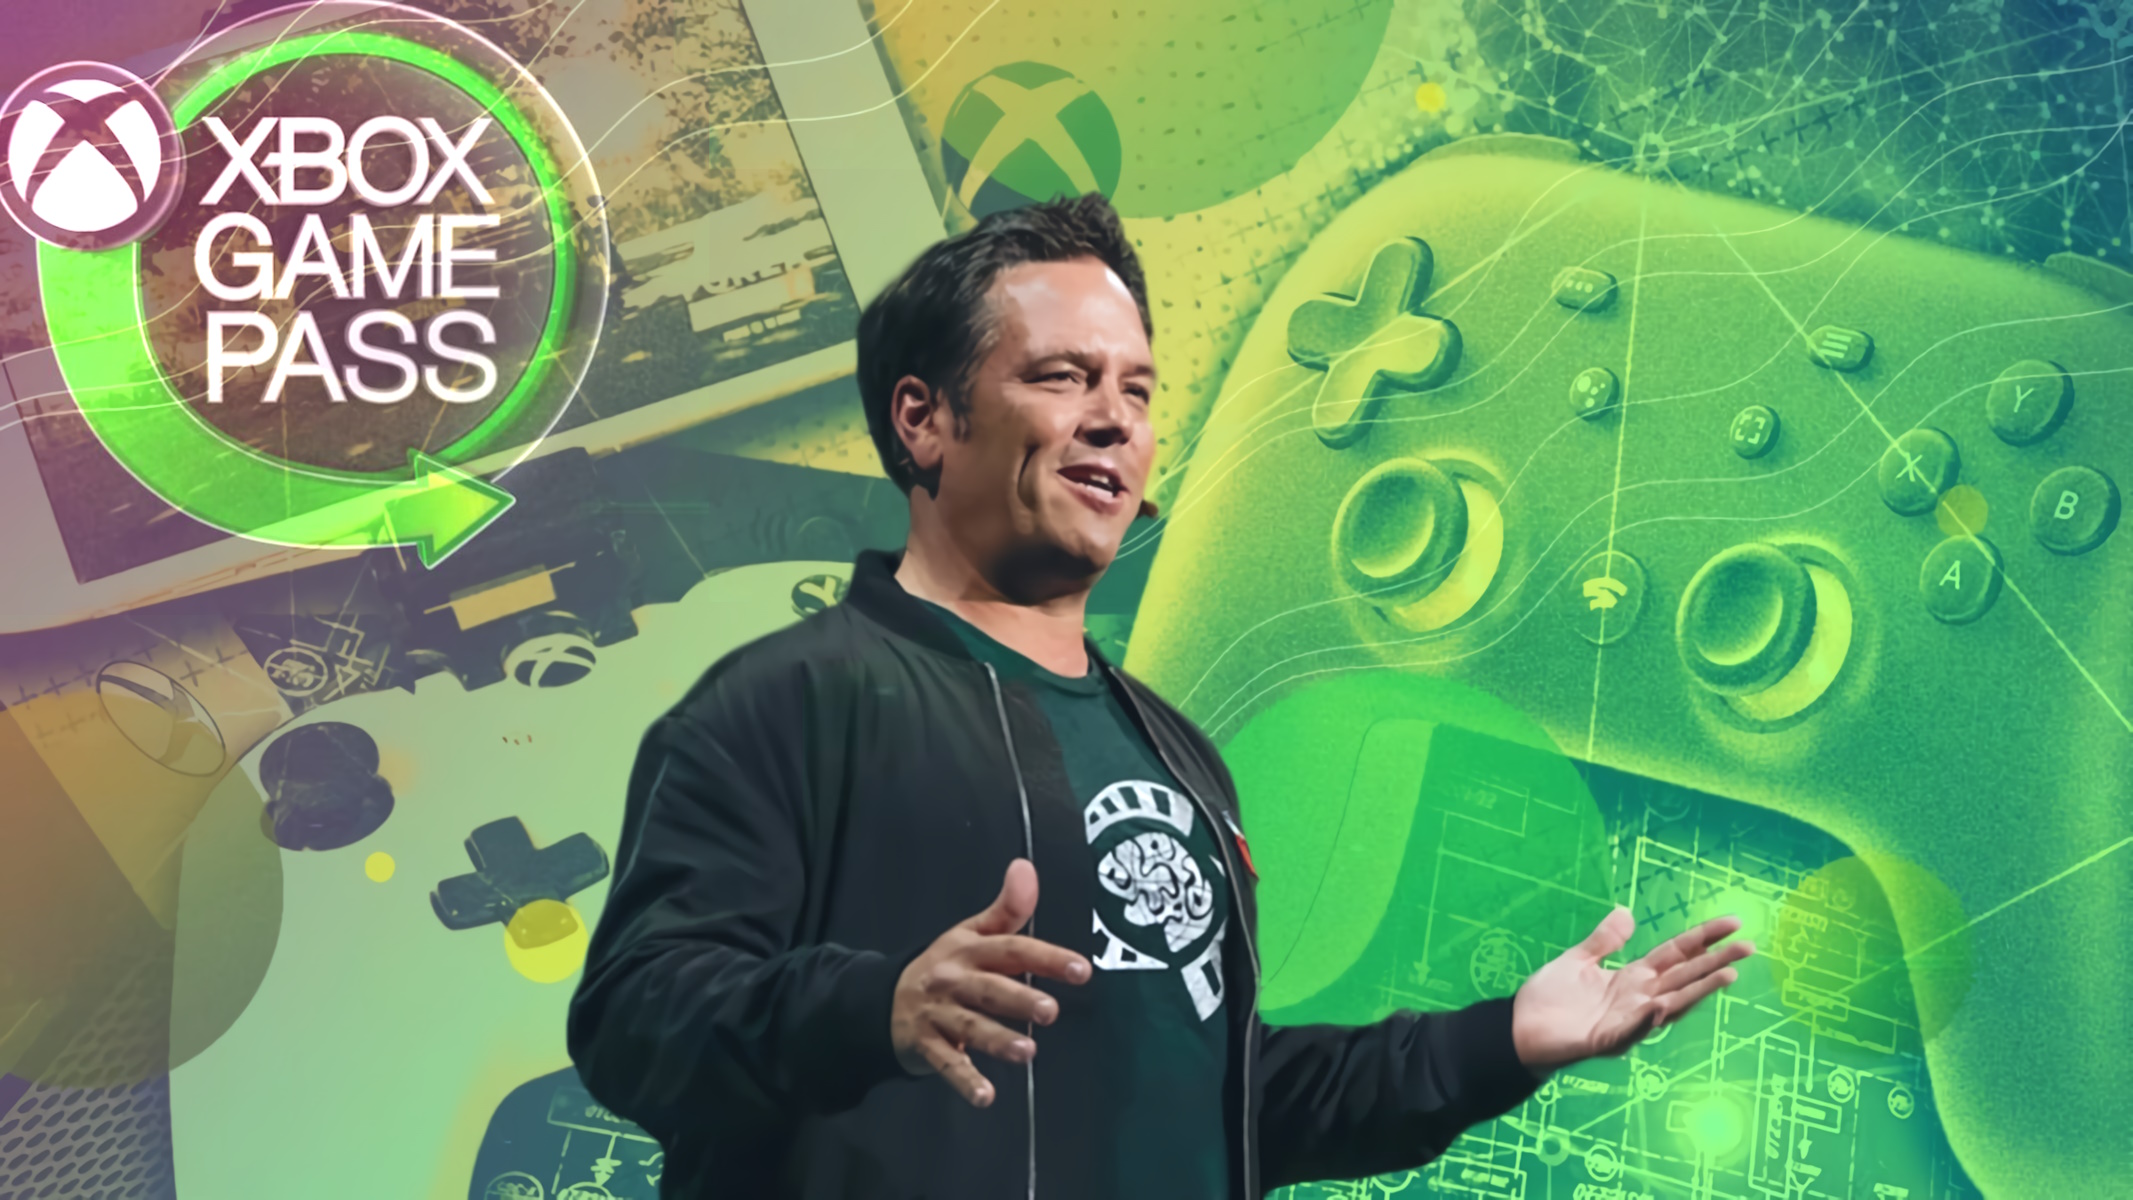 Phil Spencer Xbox Game Pass